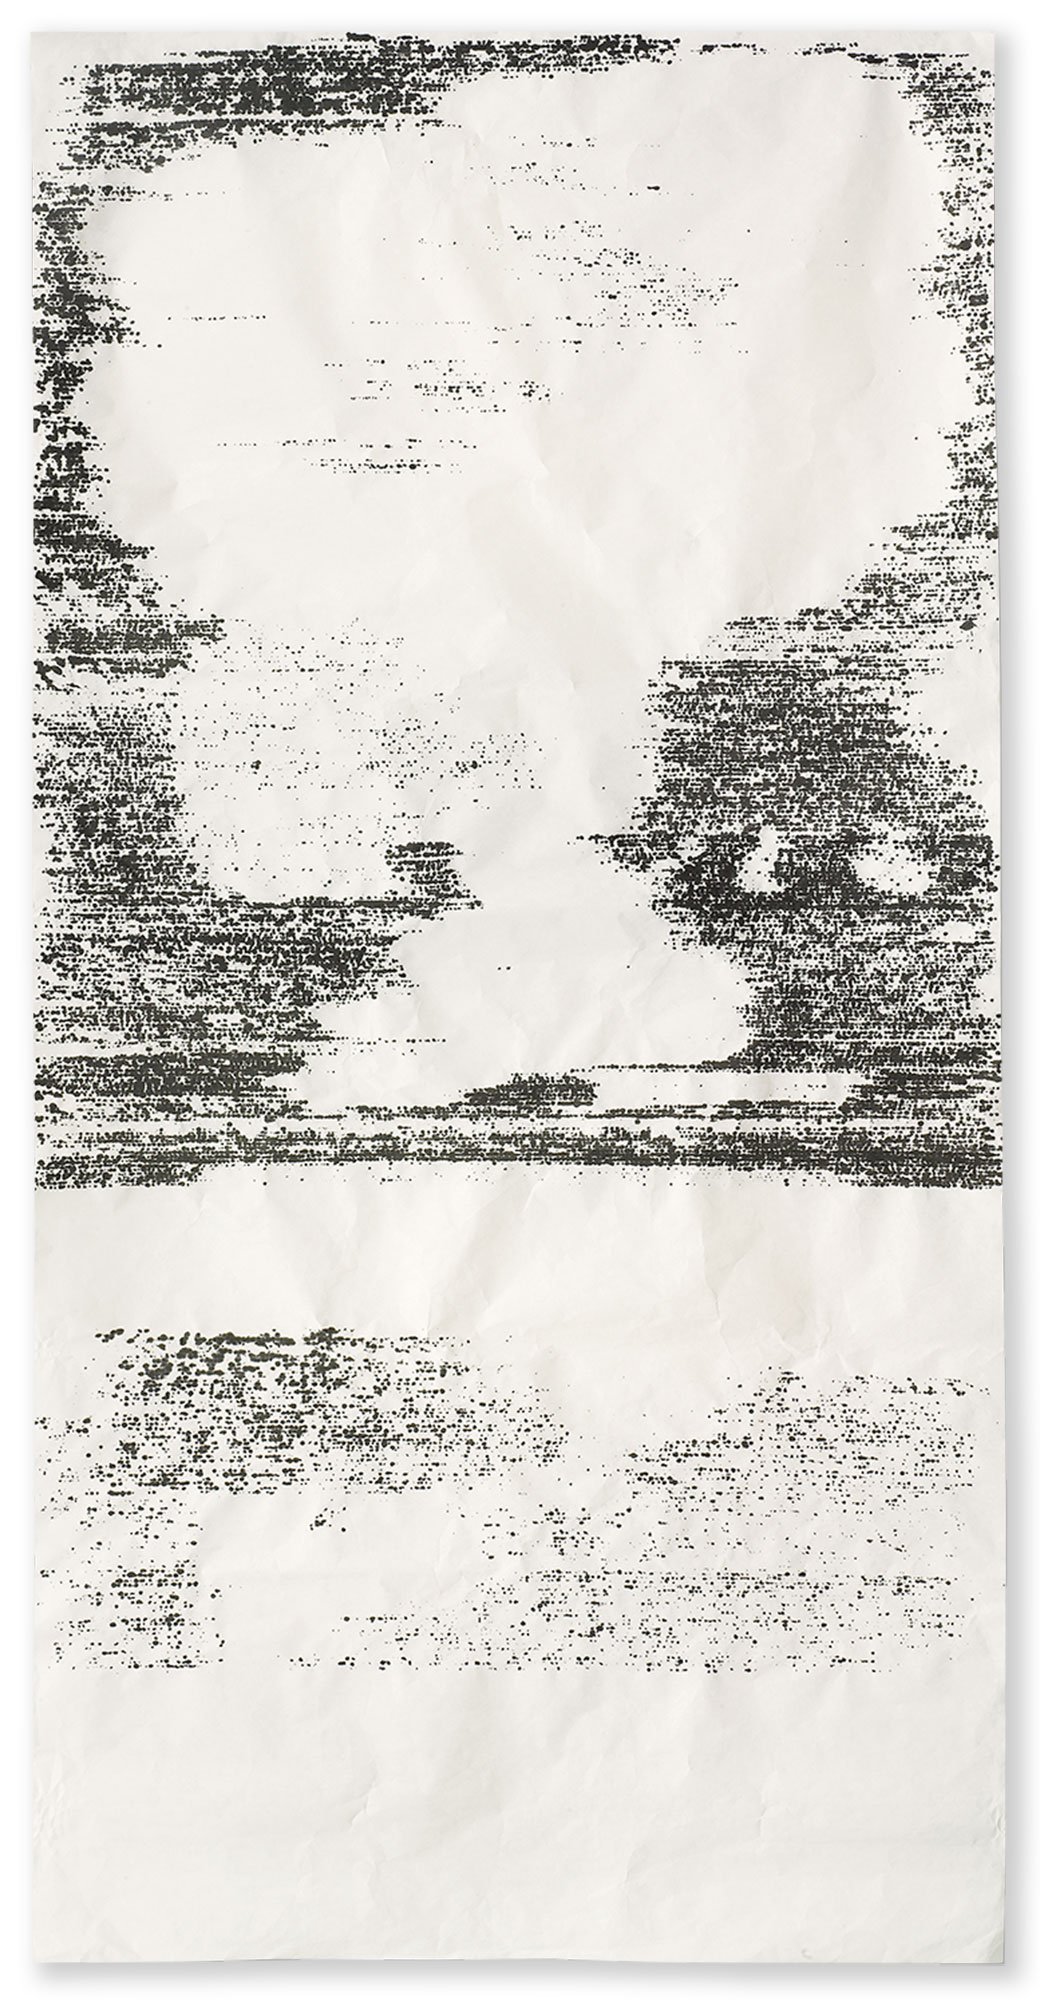 CHINA SERIES VII / 2007, ink on Xuan paper, 248 x 124 cm